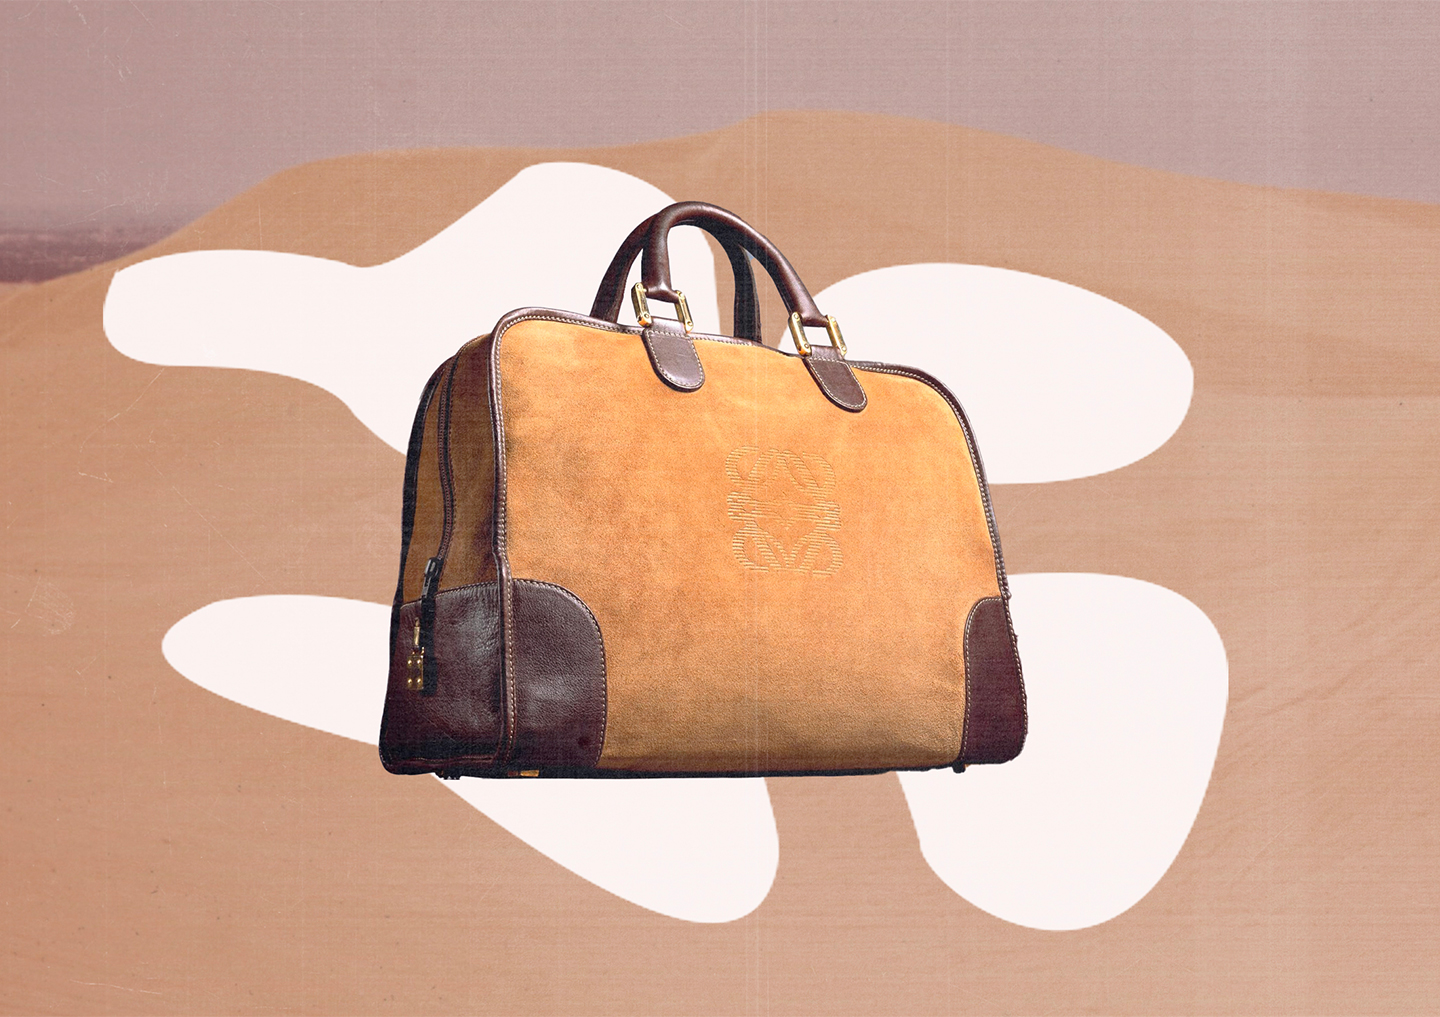 Jonathan Anderson debut S S 2015 collection for Loewe: we speak to the  designer about setting a new agenda